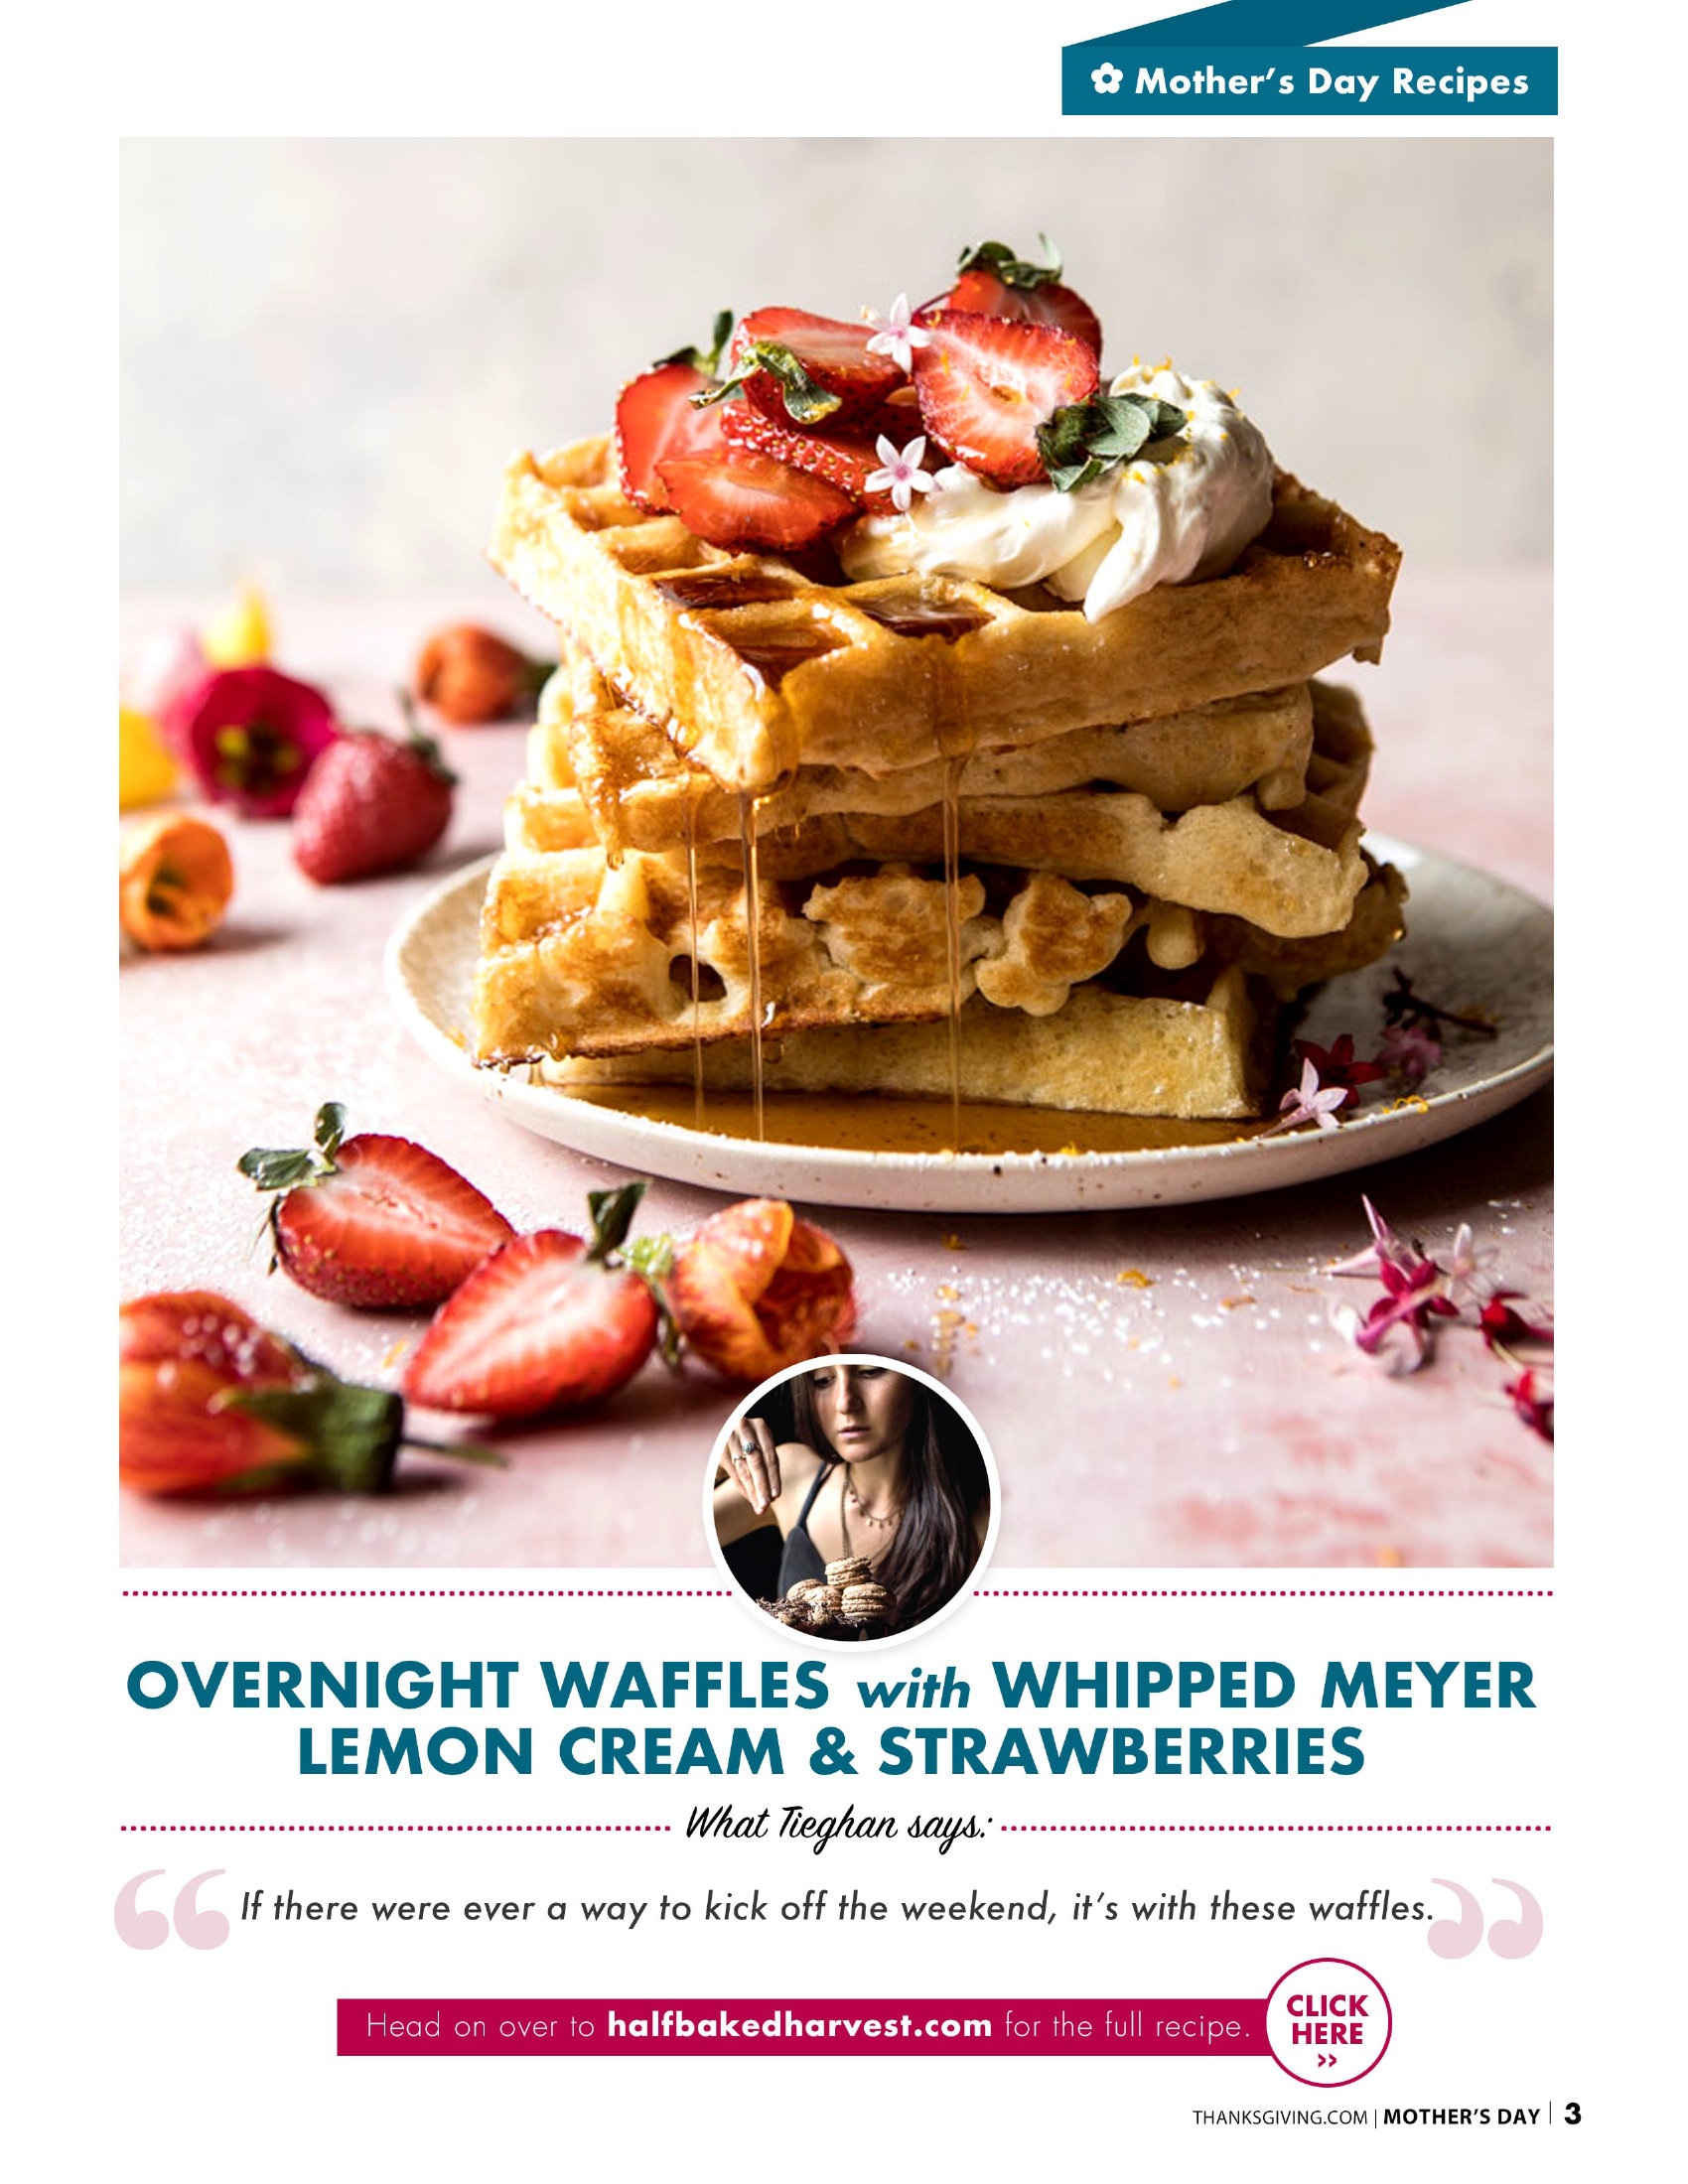 Overnight waffles with whipped Meyer lemon cream and strawberries